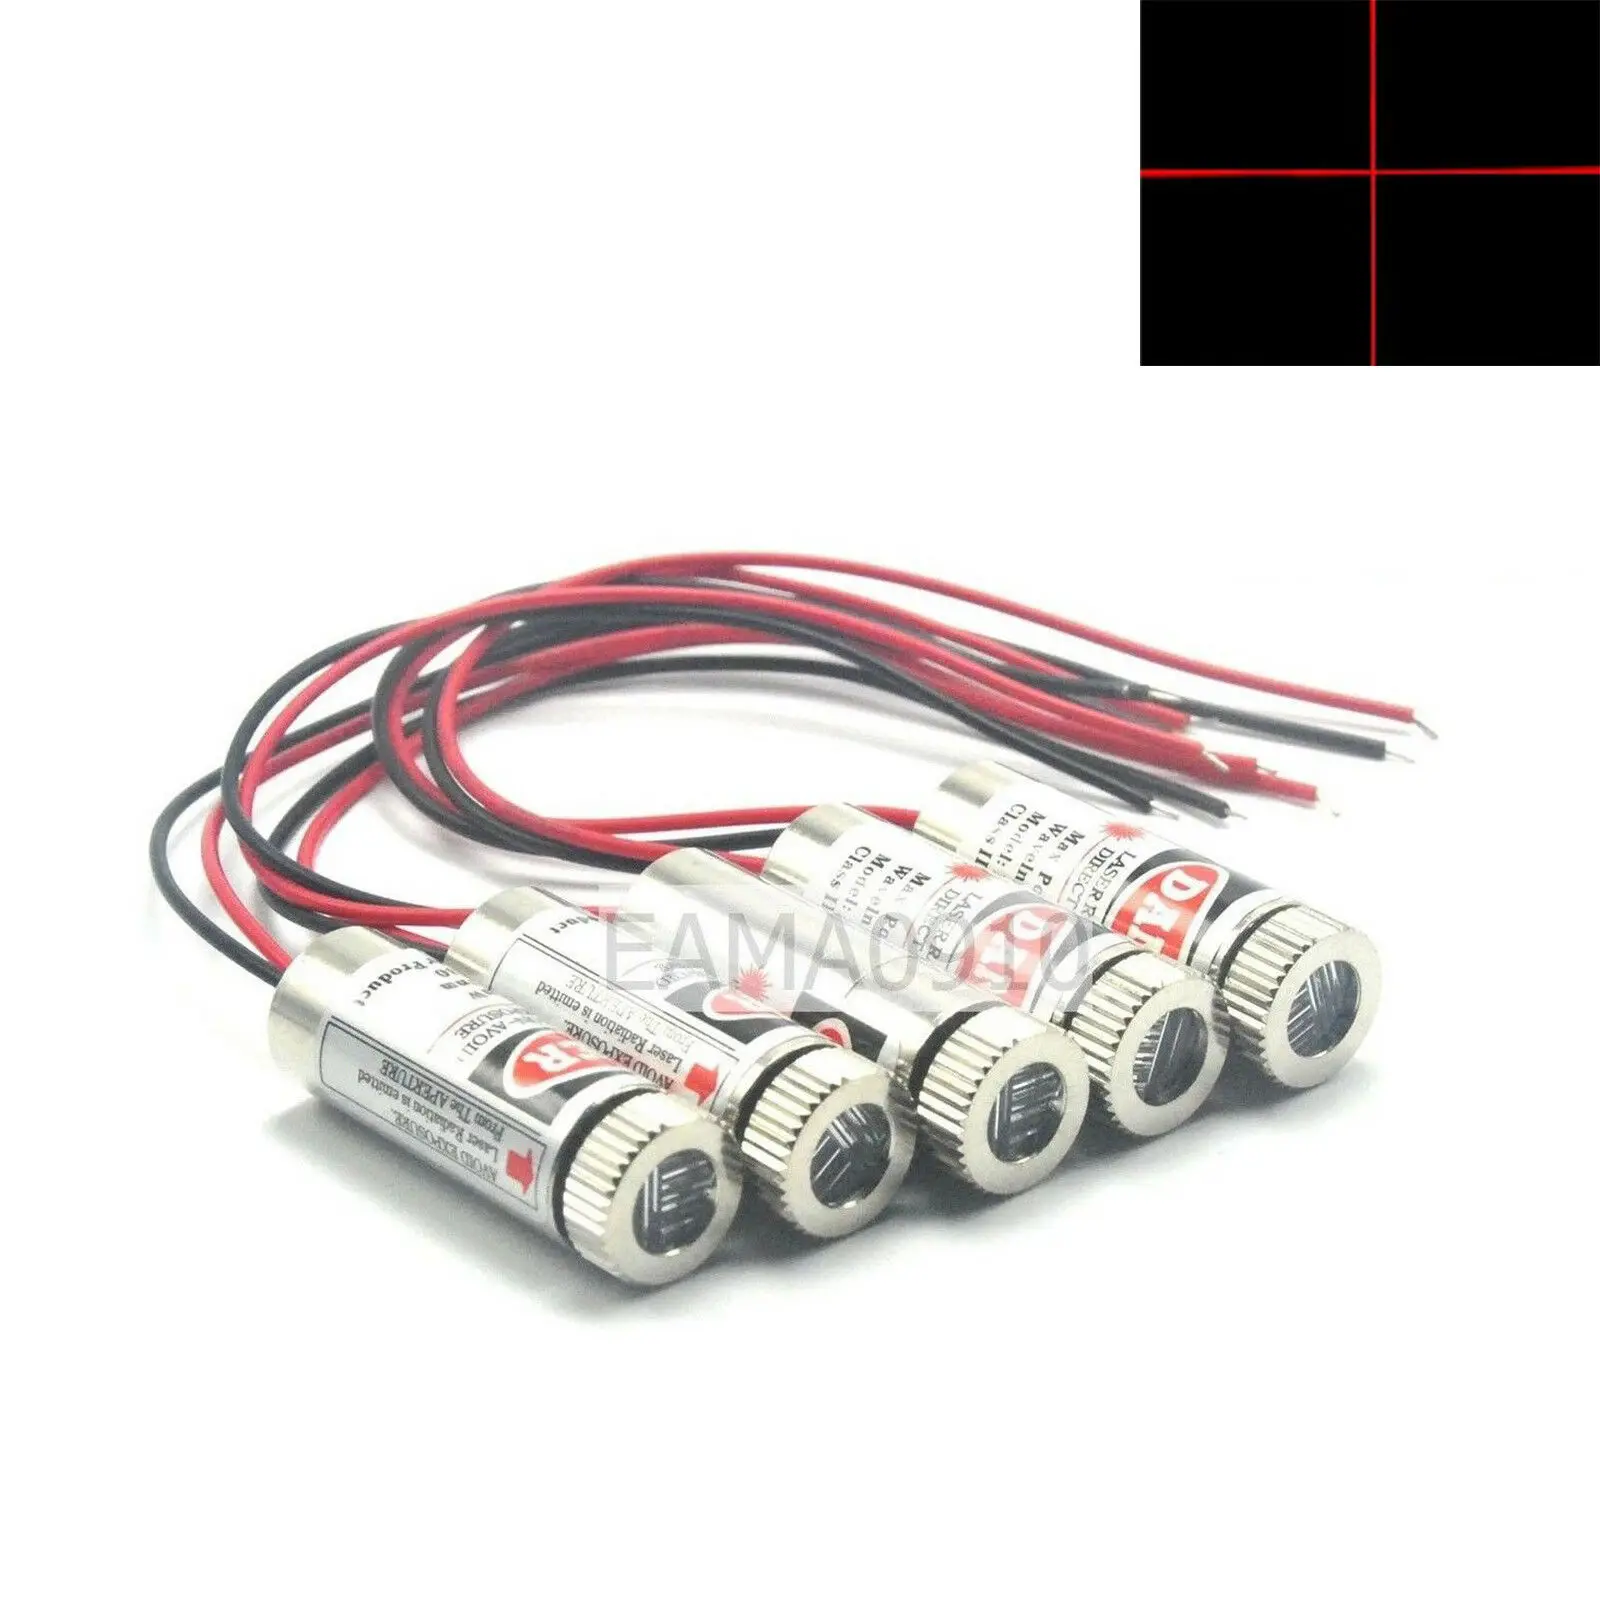 5pcs Focusable 3-5V 650nm 5mW Red Laser Cross Diode Module 12x35mm w/Driver-in